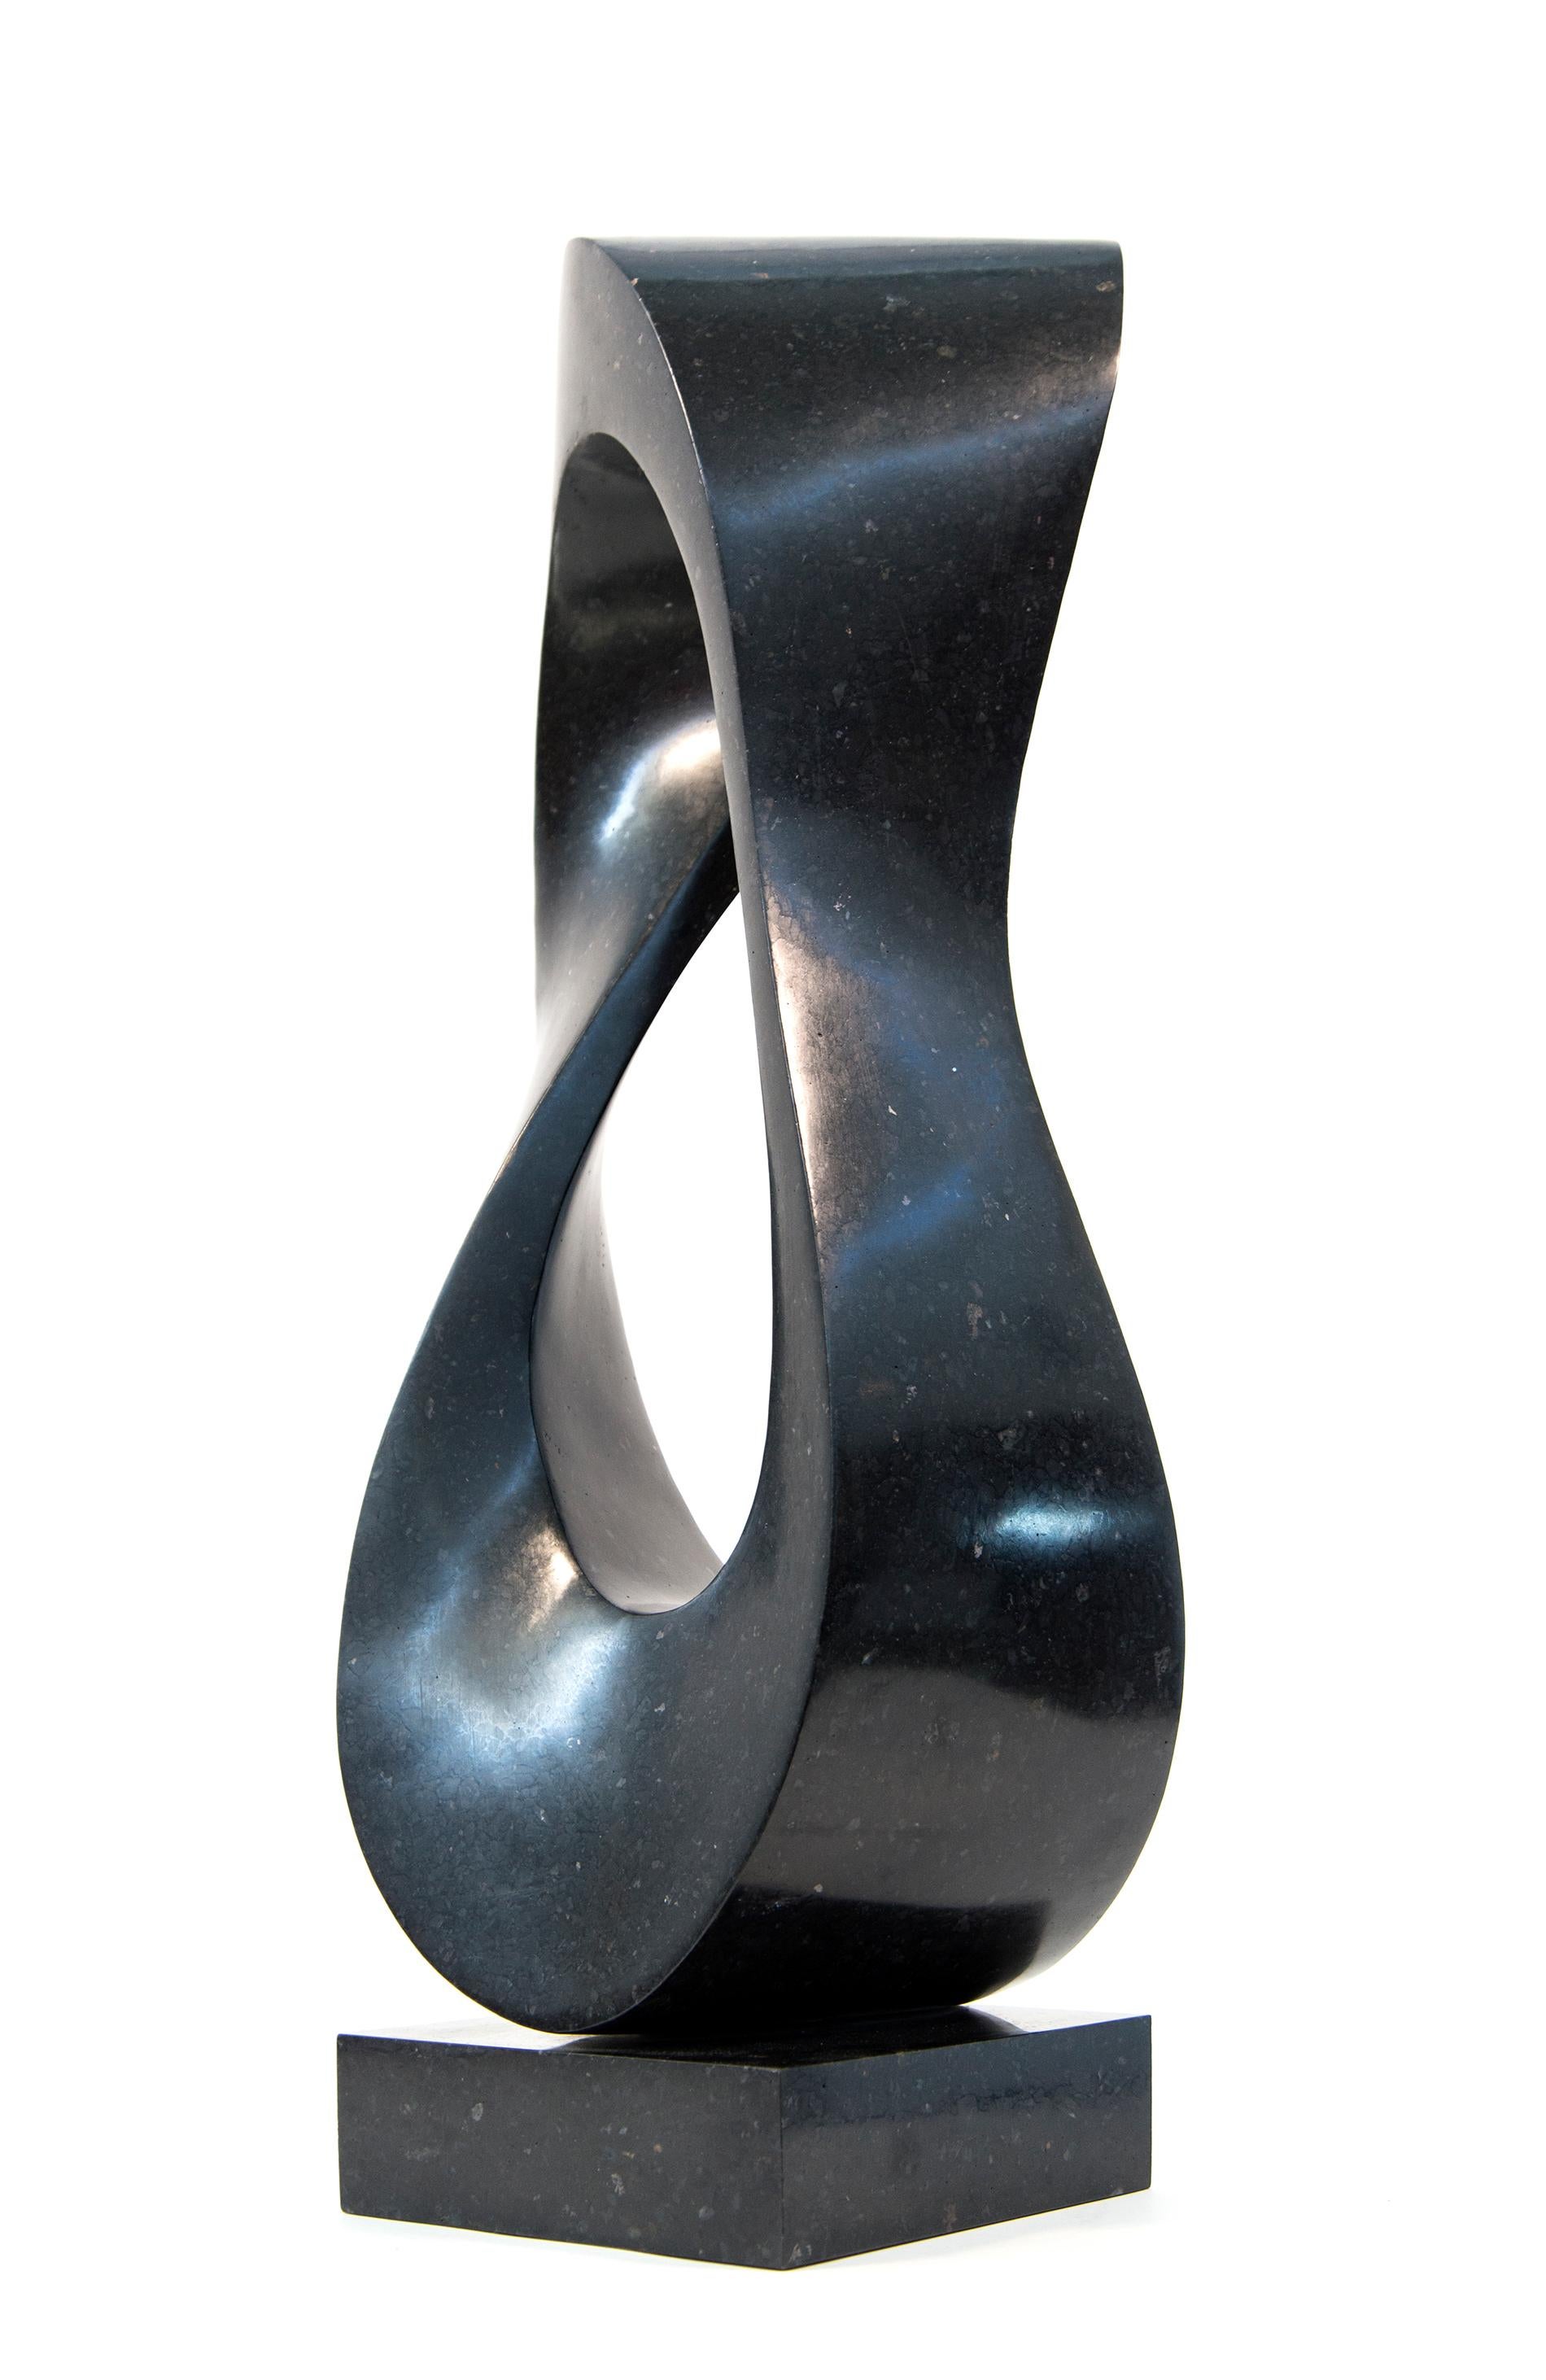 Mobius Minor 1/50 - dark, smooth, polished, abstract, black granite sculpture For Sale 5